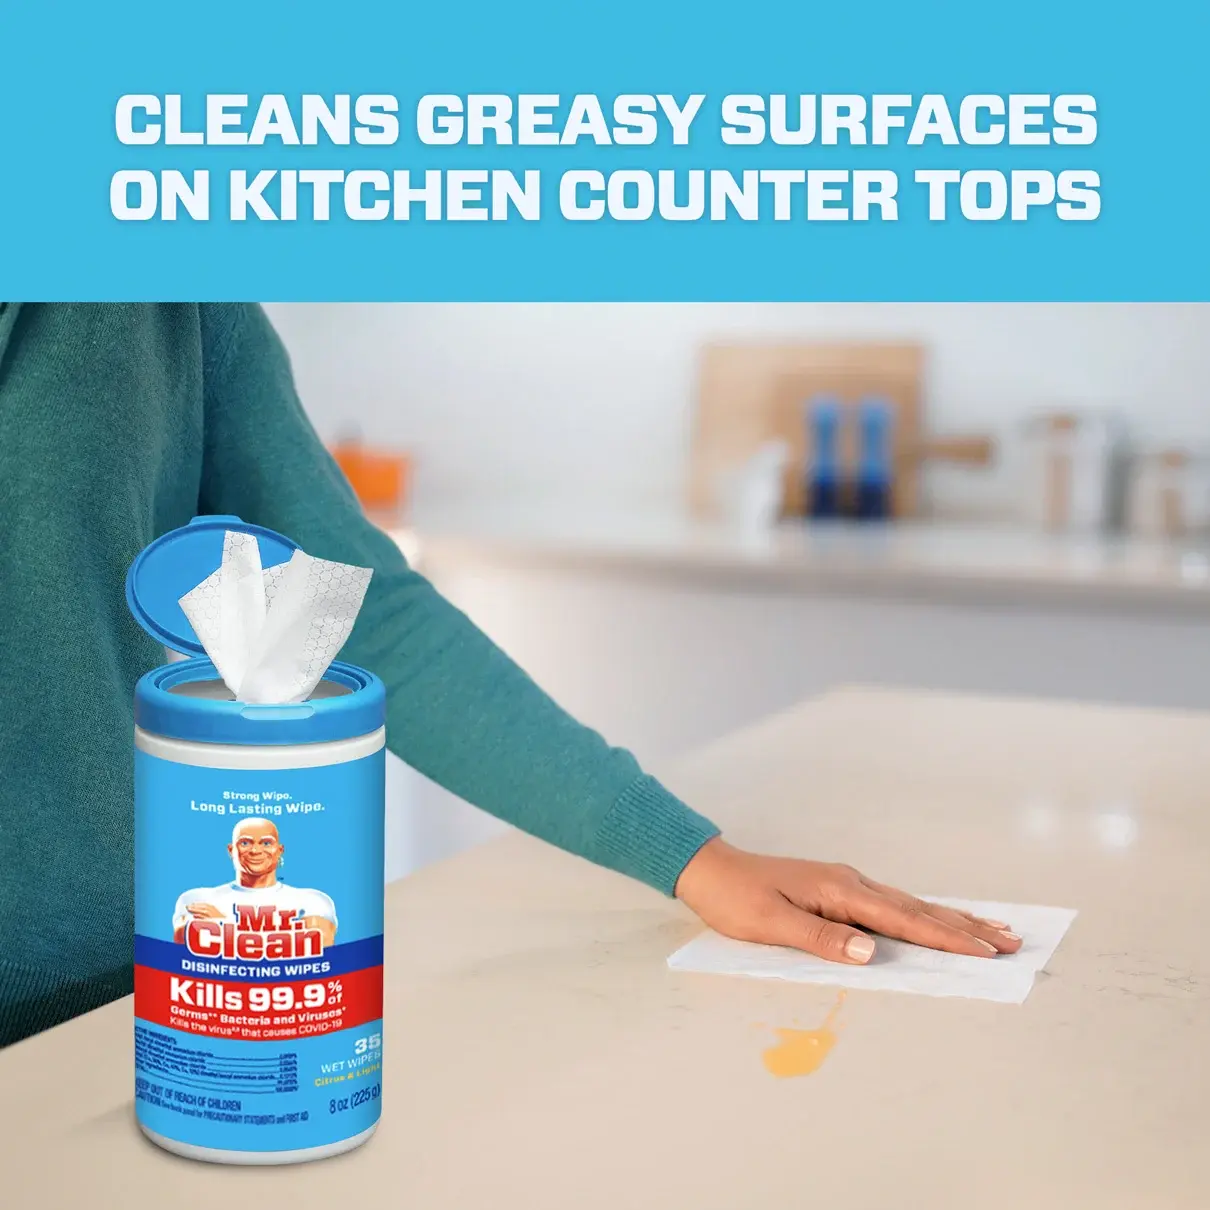 Disinfecting Wipes with Citrus Scent cleans greasy surfaces